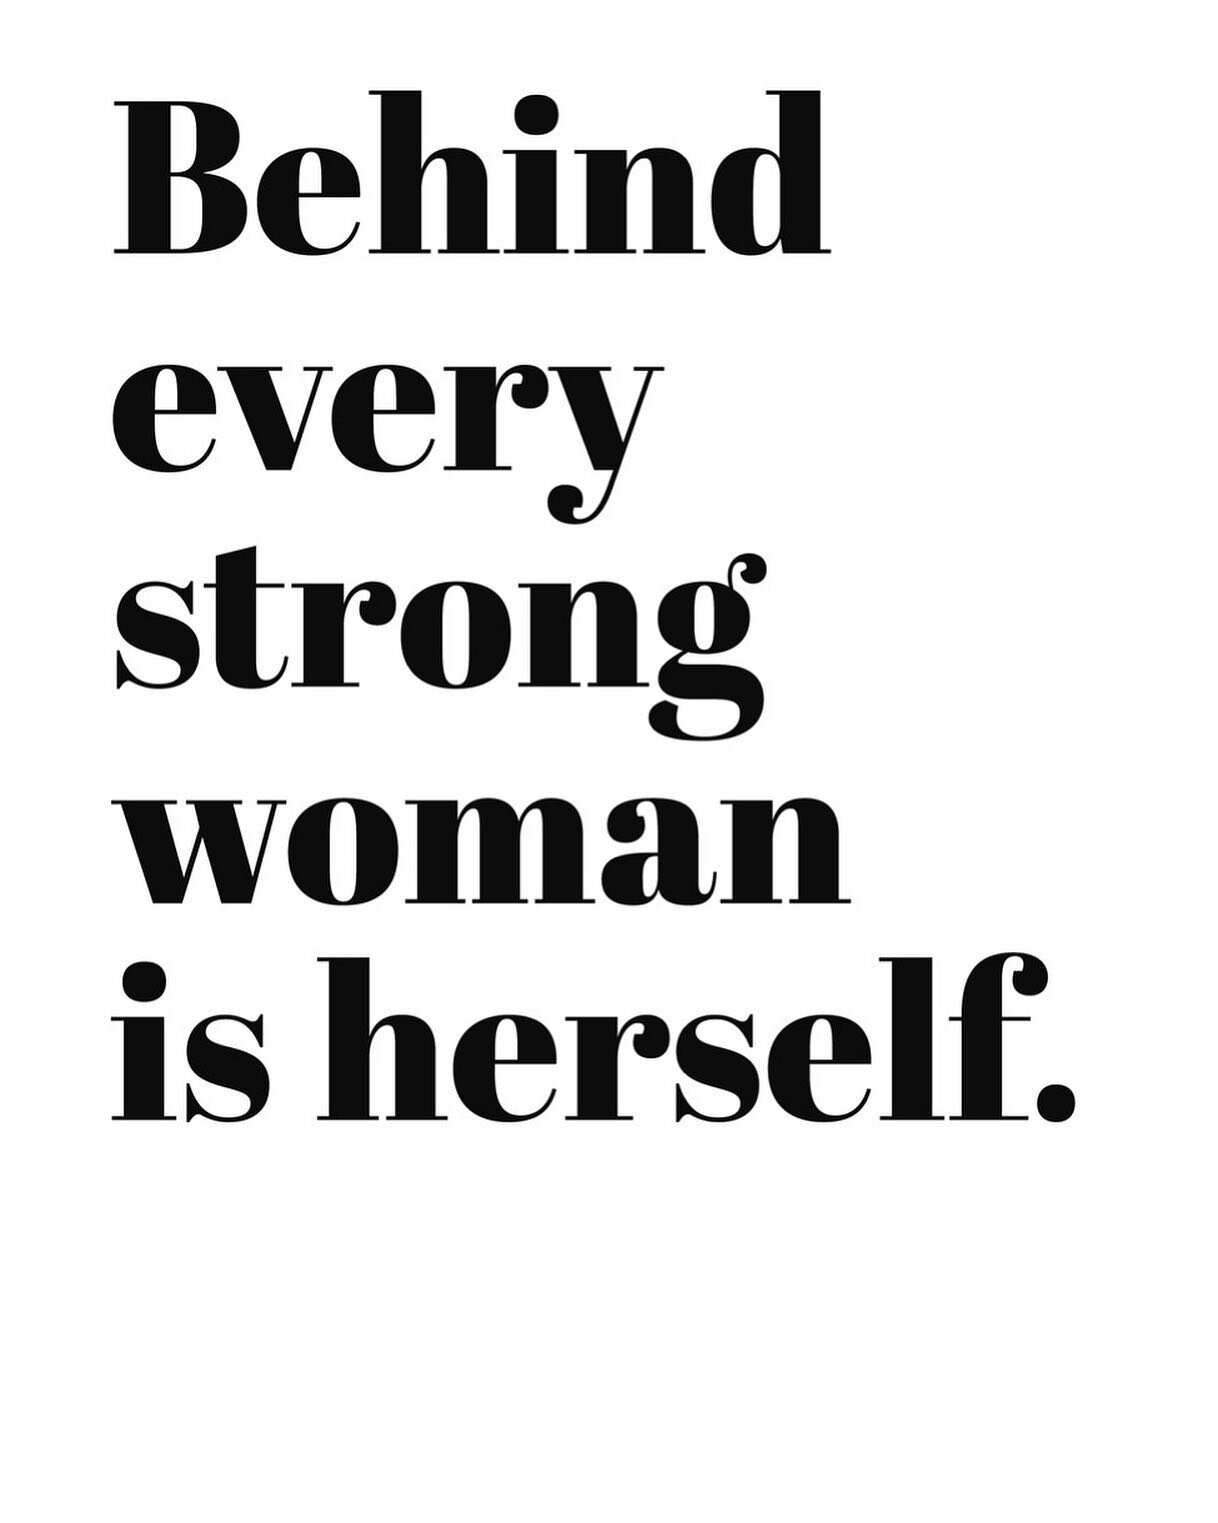 Happy International Women&rsquo;s Day to all of those amazing, strong, 👊talented, determined, passionate, loving, 💜giving, selfless, multi-tasking women 🙌🙌

#femaleempowerment #women #womensupportingwomen #strongwomenquotes #strongwomenrock #fabu